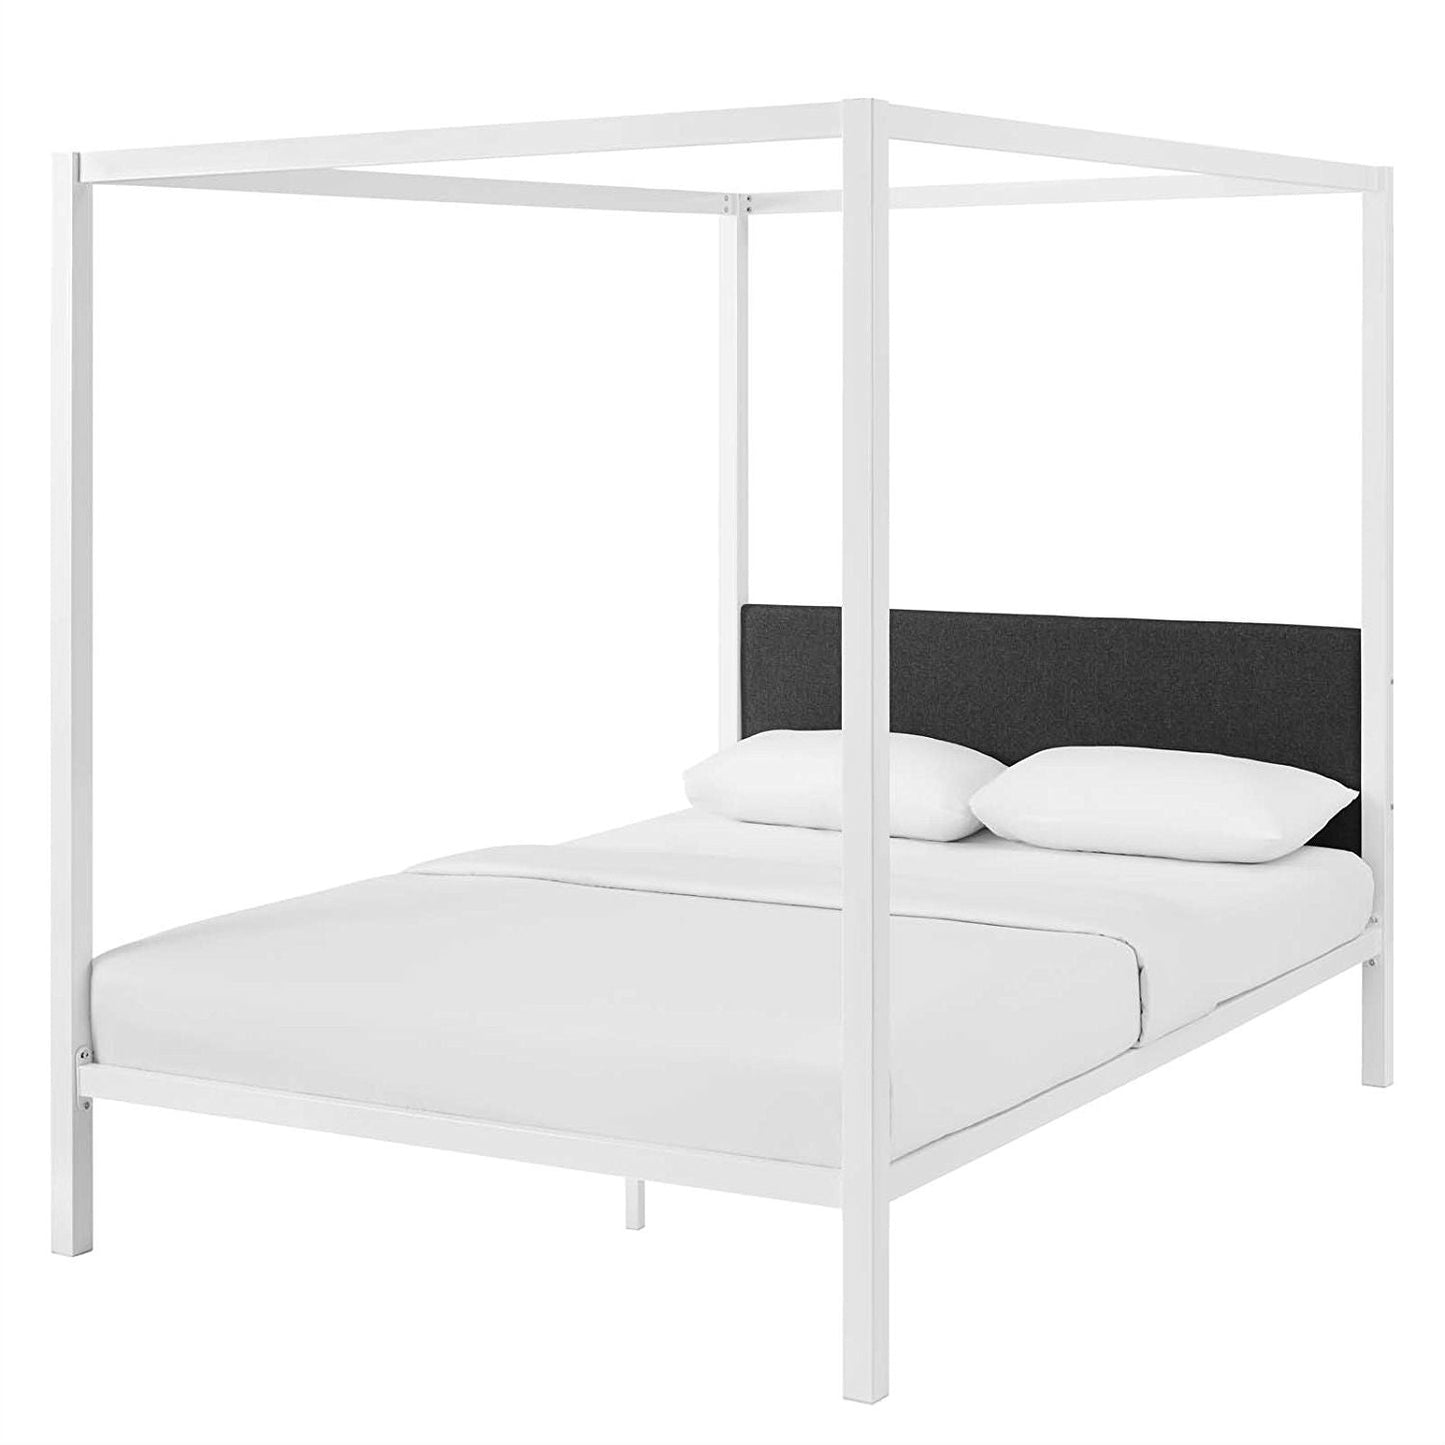 Bedroom > Bed Frames > Canopy Beds - Queen Size White Metal Canopy Bed Frame With Grey Fabric Upholstered Headboard